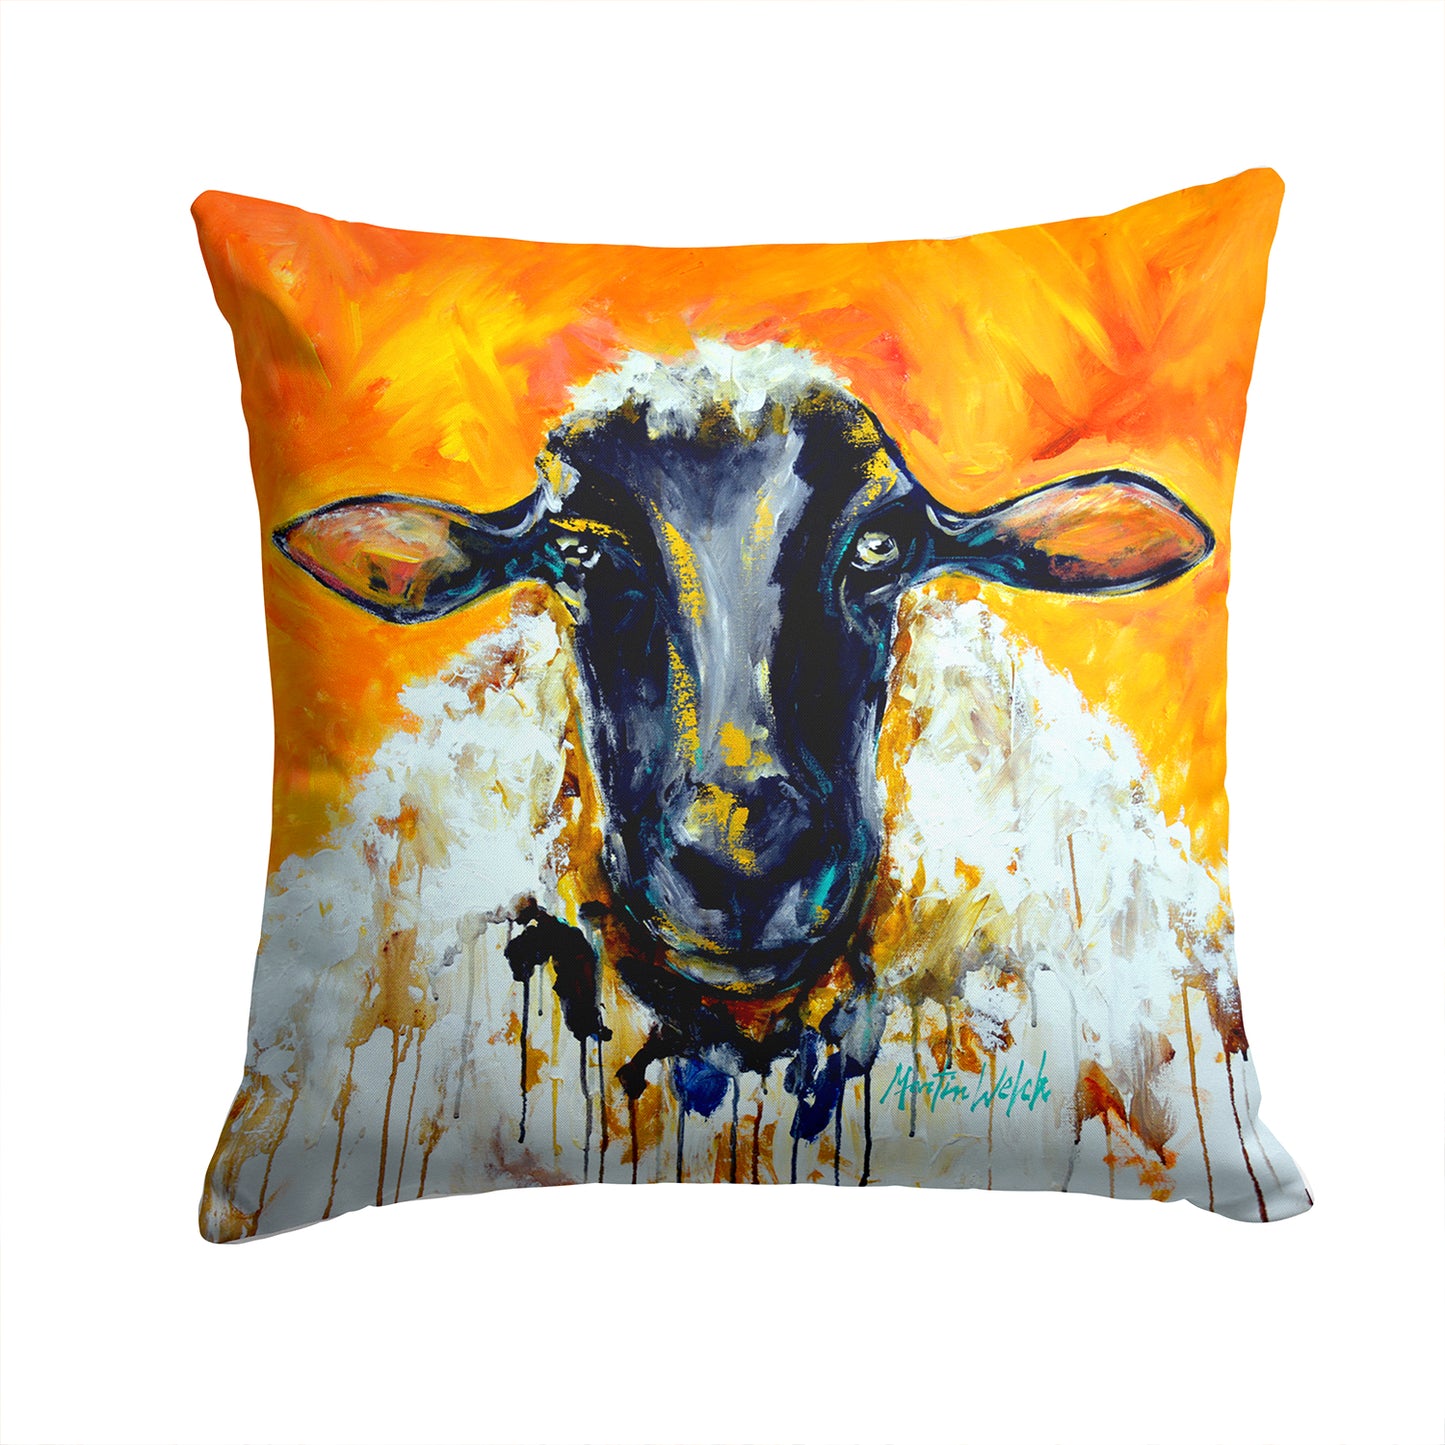 Buy this Peach Wool Sheep Fabric Decorative Pillow